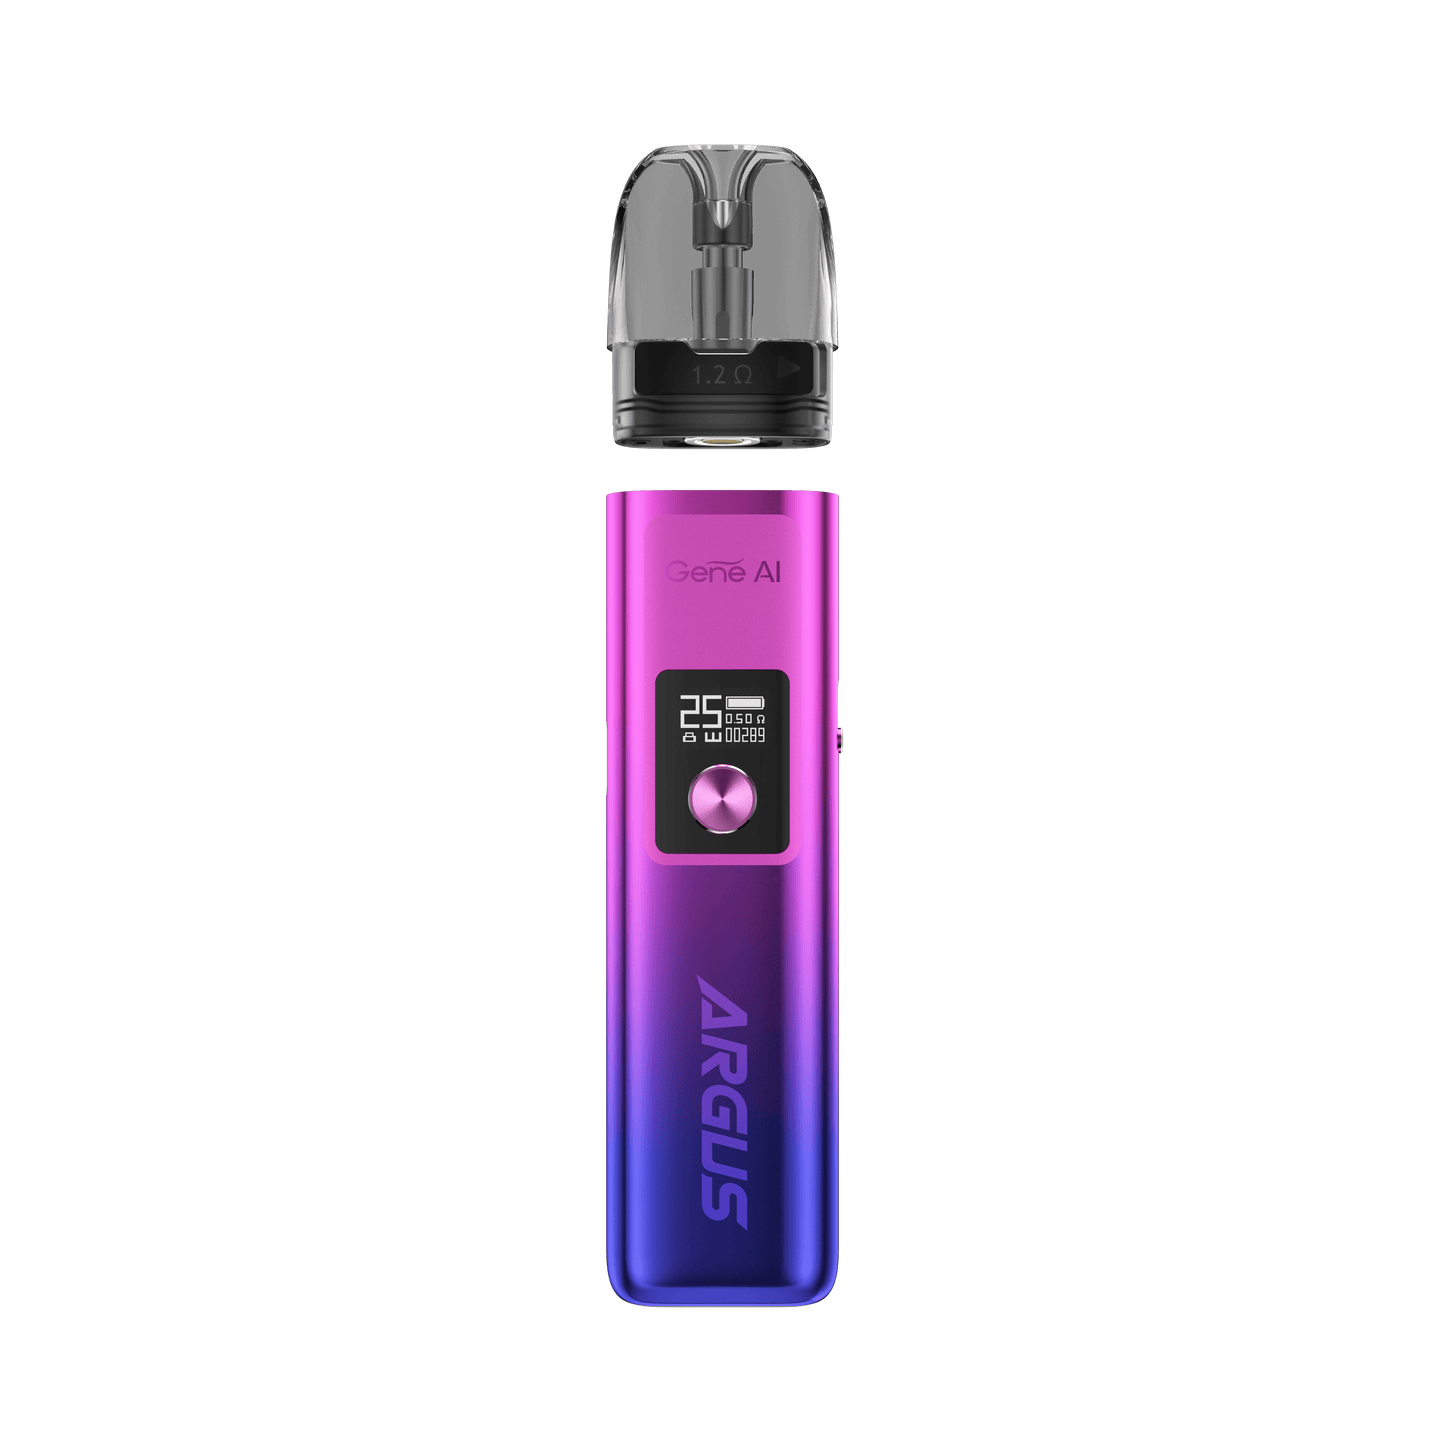 VOOPOO Argus G 25W Pod System Kit 1000mAh - Clearance